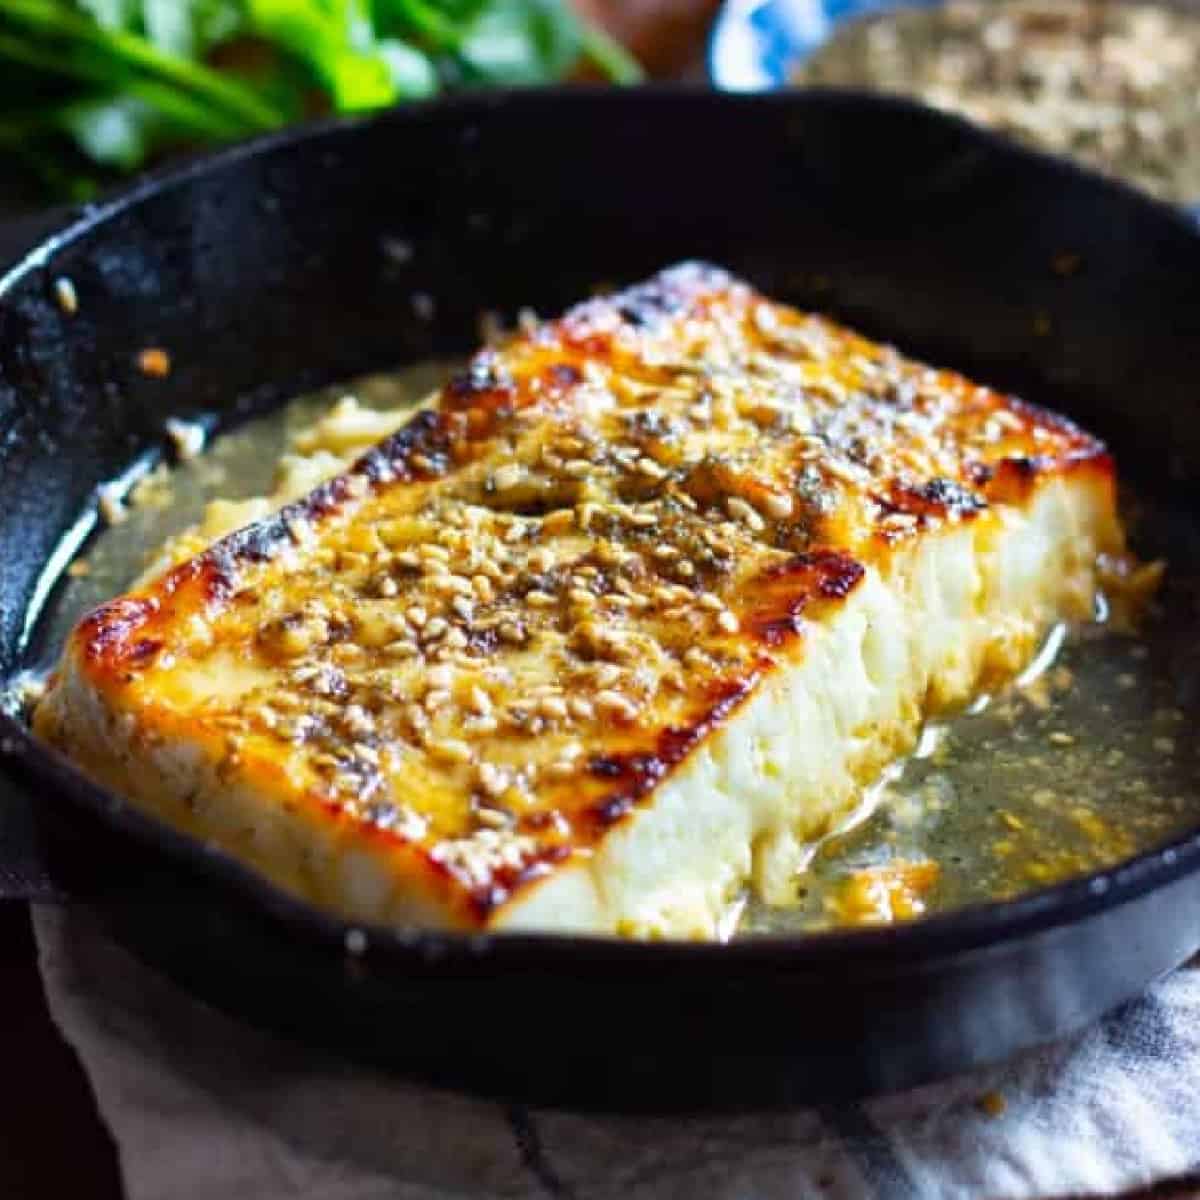 This baked feta recipe is easy and makes a delicious appetizer. It's made with only five ingredients and is topped with honey and zaatar. 